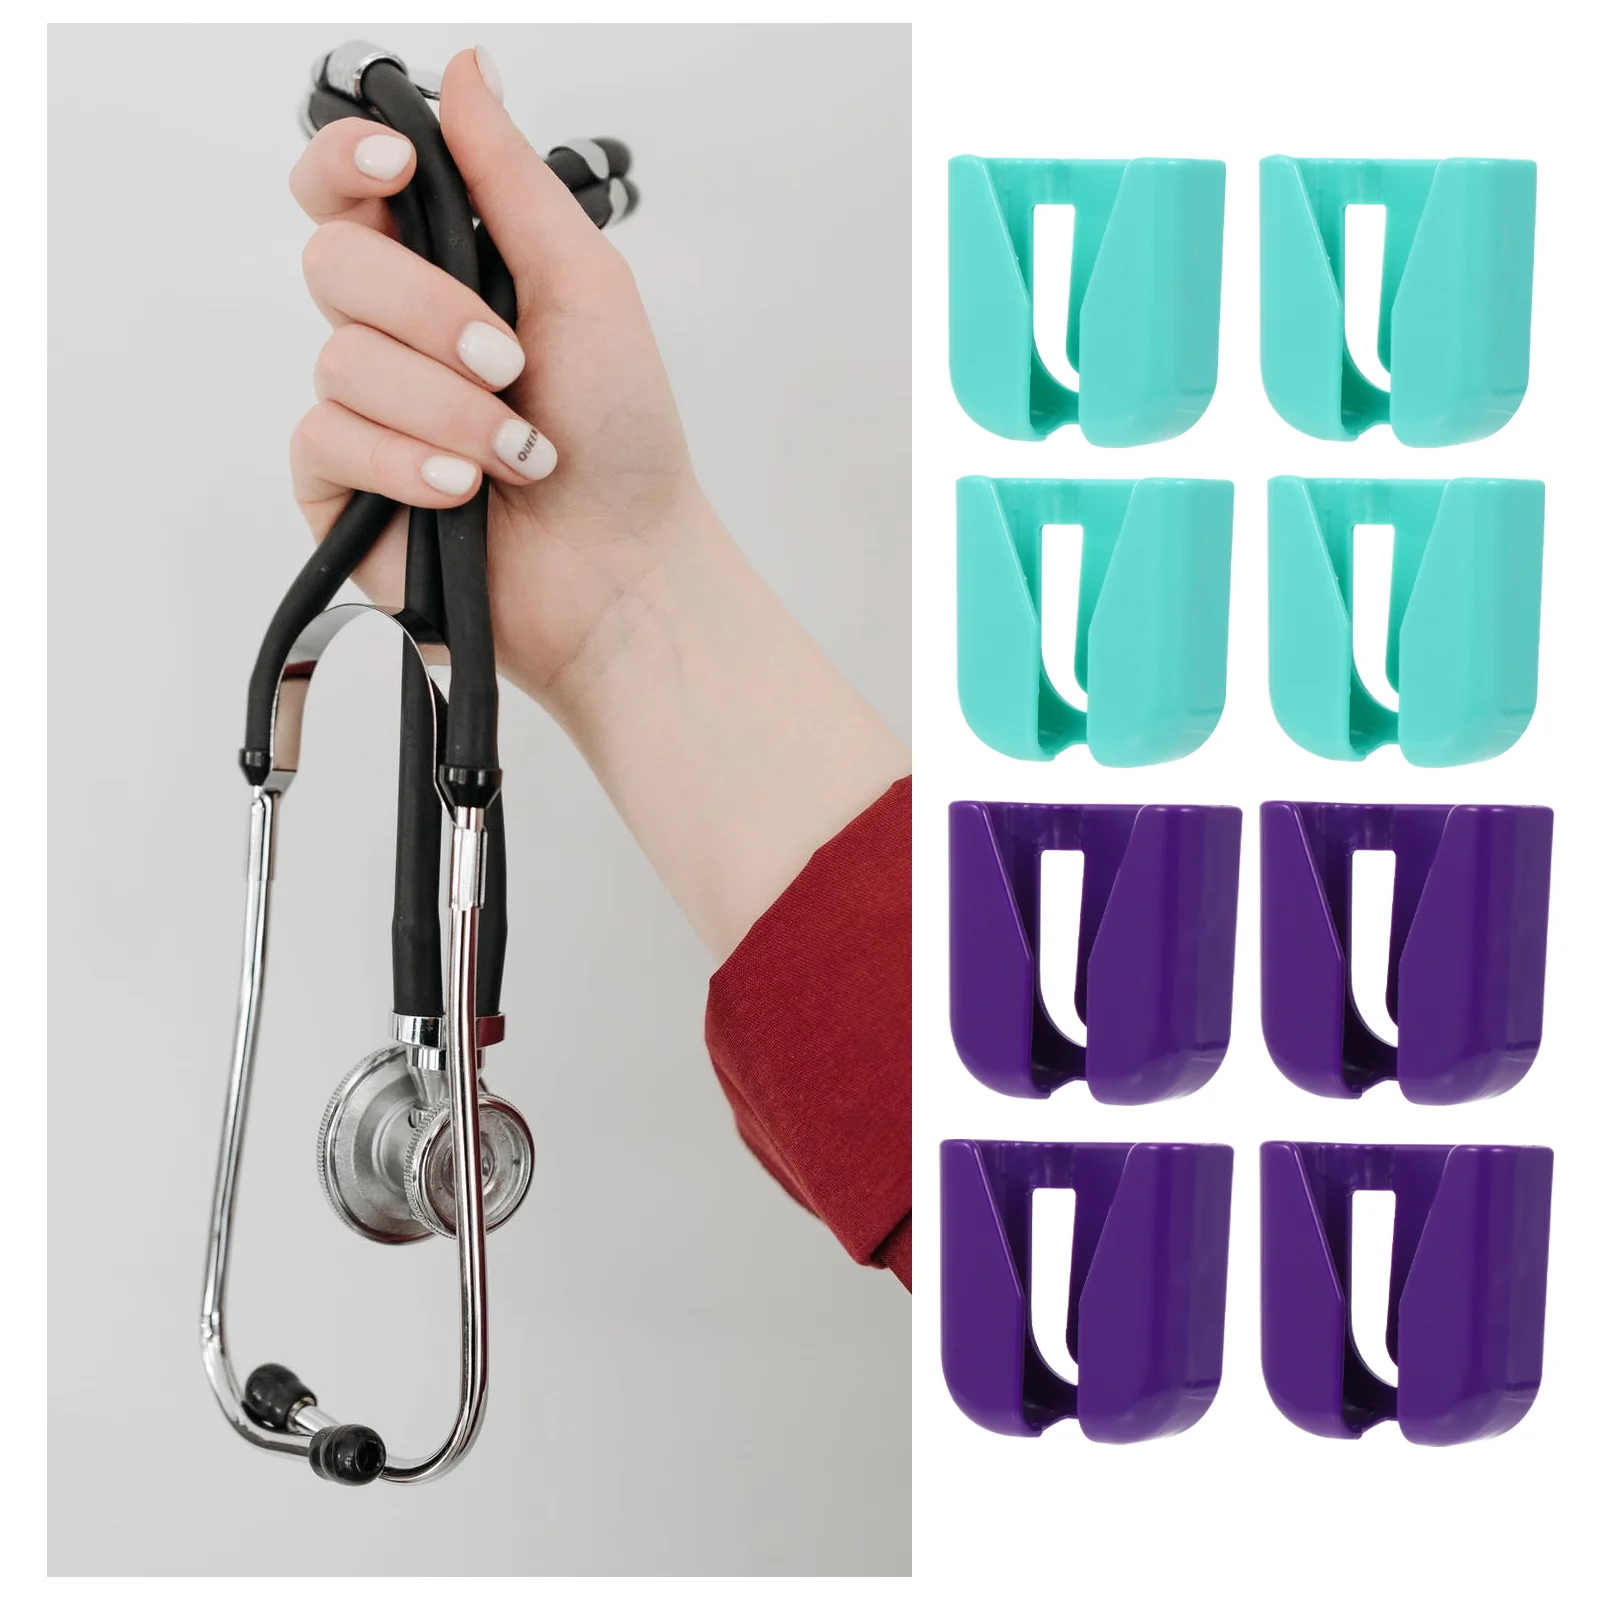 

Clip Practical Stethoscope Clamps Echo-meter Accessories Clips Storage Fixing Racks Useful Holders Hooks